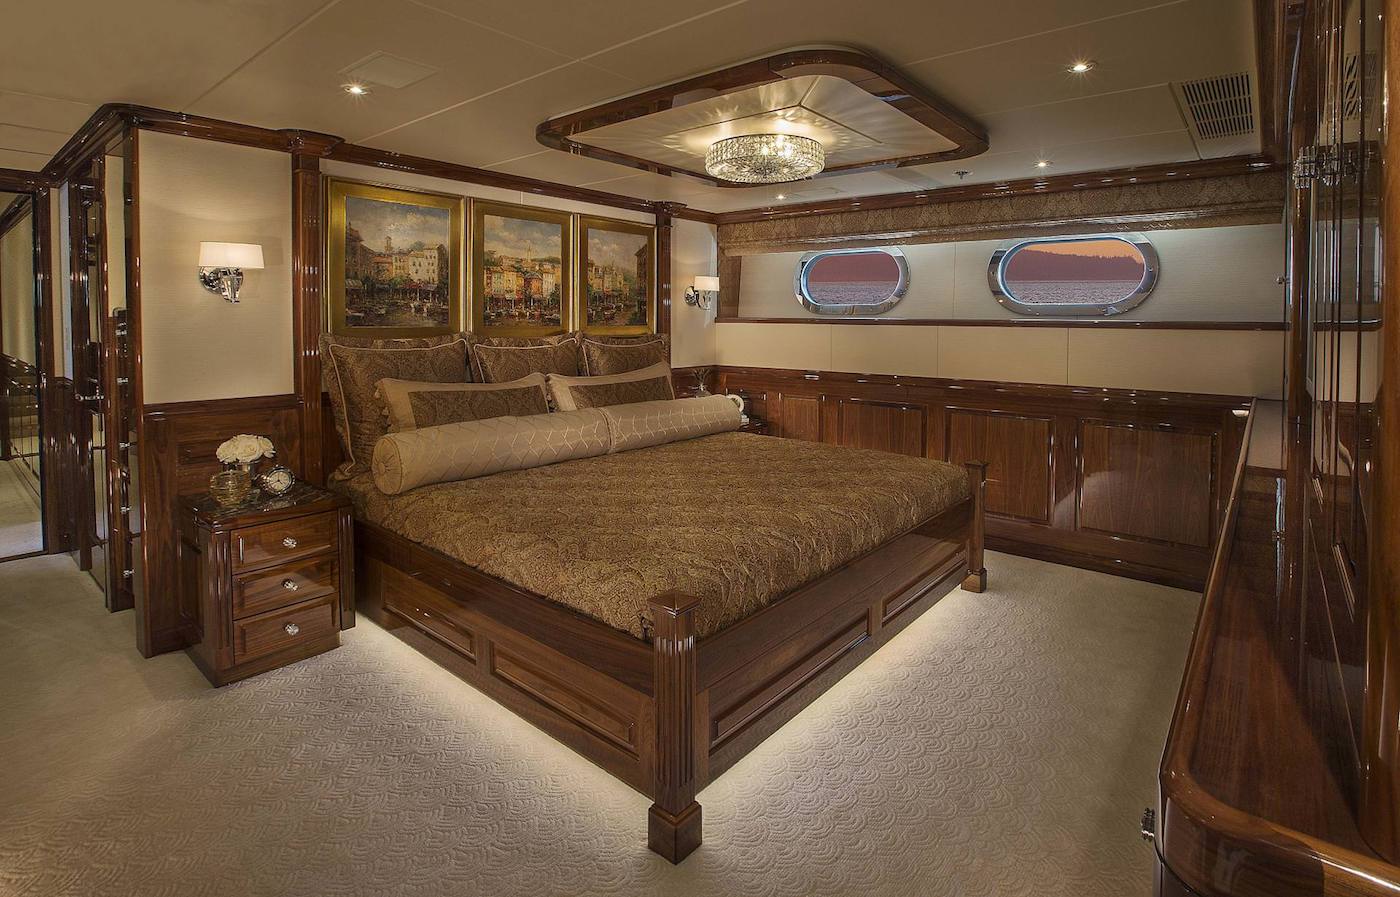 VIP Stateroom (new Cream Color Bedding Photos Coming Soon)